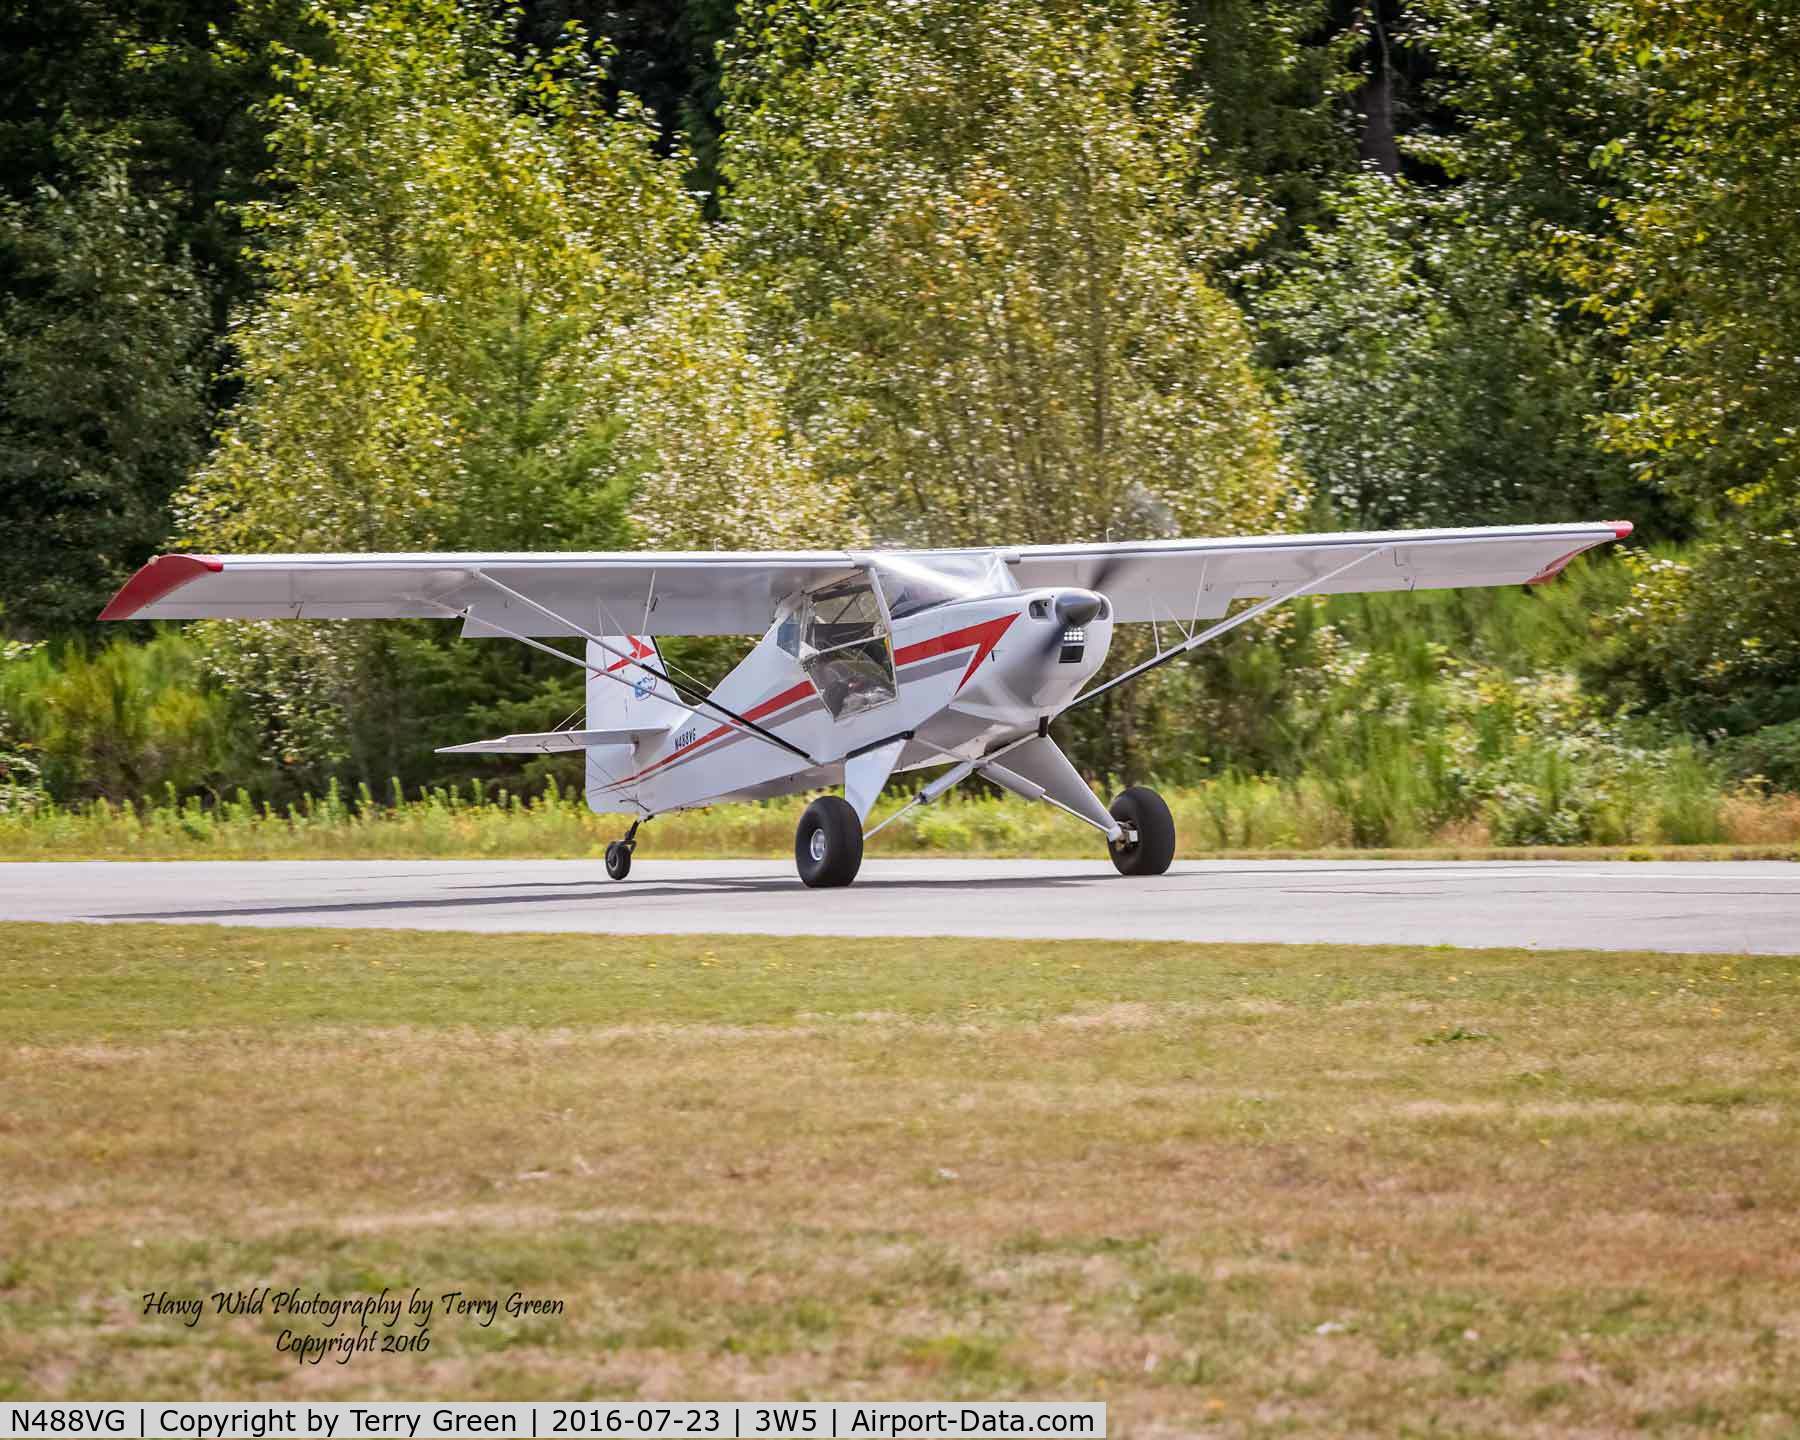 N488VG, 2013 Just Aircraft Highlander C/N JA214--9-10, 2016 North Cascades Vintage Aircraft Museum Fly-In Mears Field 3W5 Concrete Washington